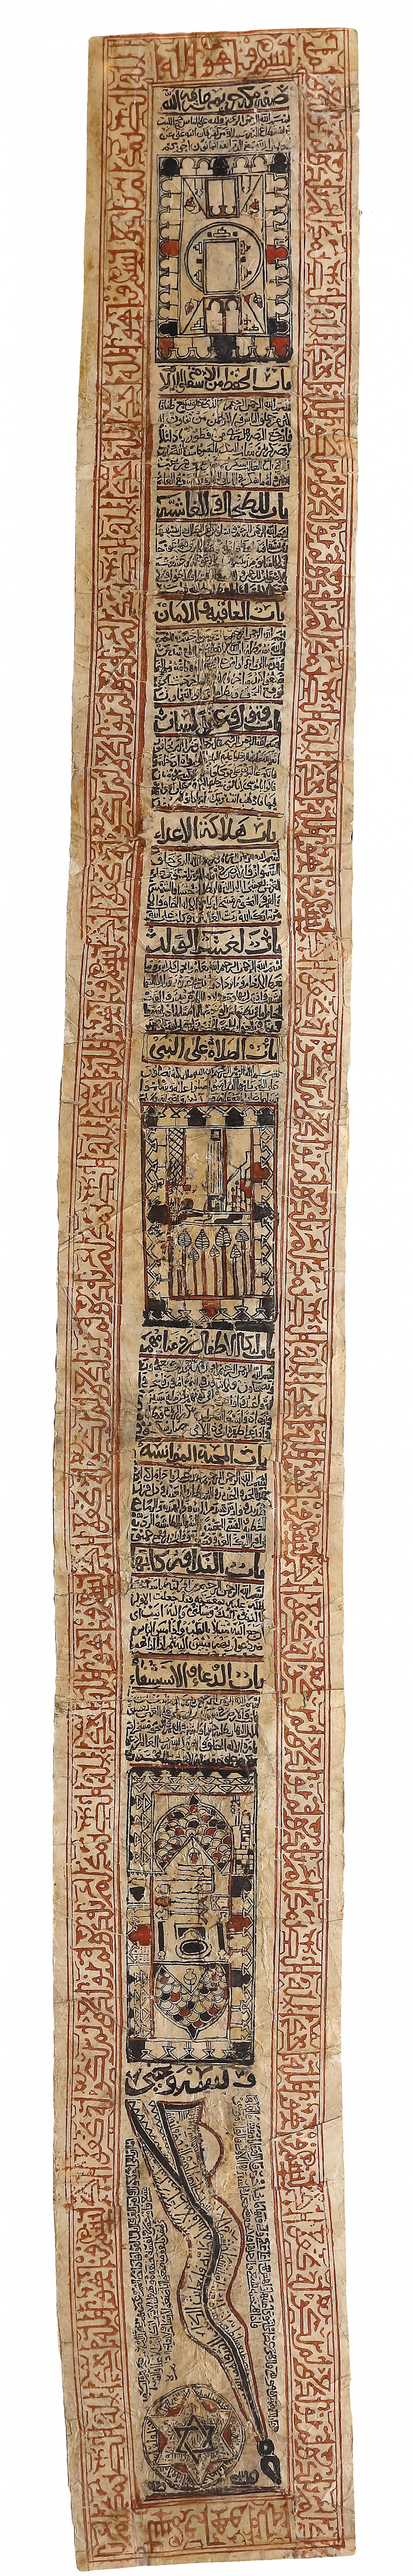 A TALISMANIC SCROLL, POSSIBLY ANDALUSIA, 11TH-12TH CENTURY - Image 2 of 8